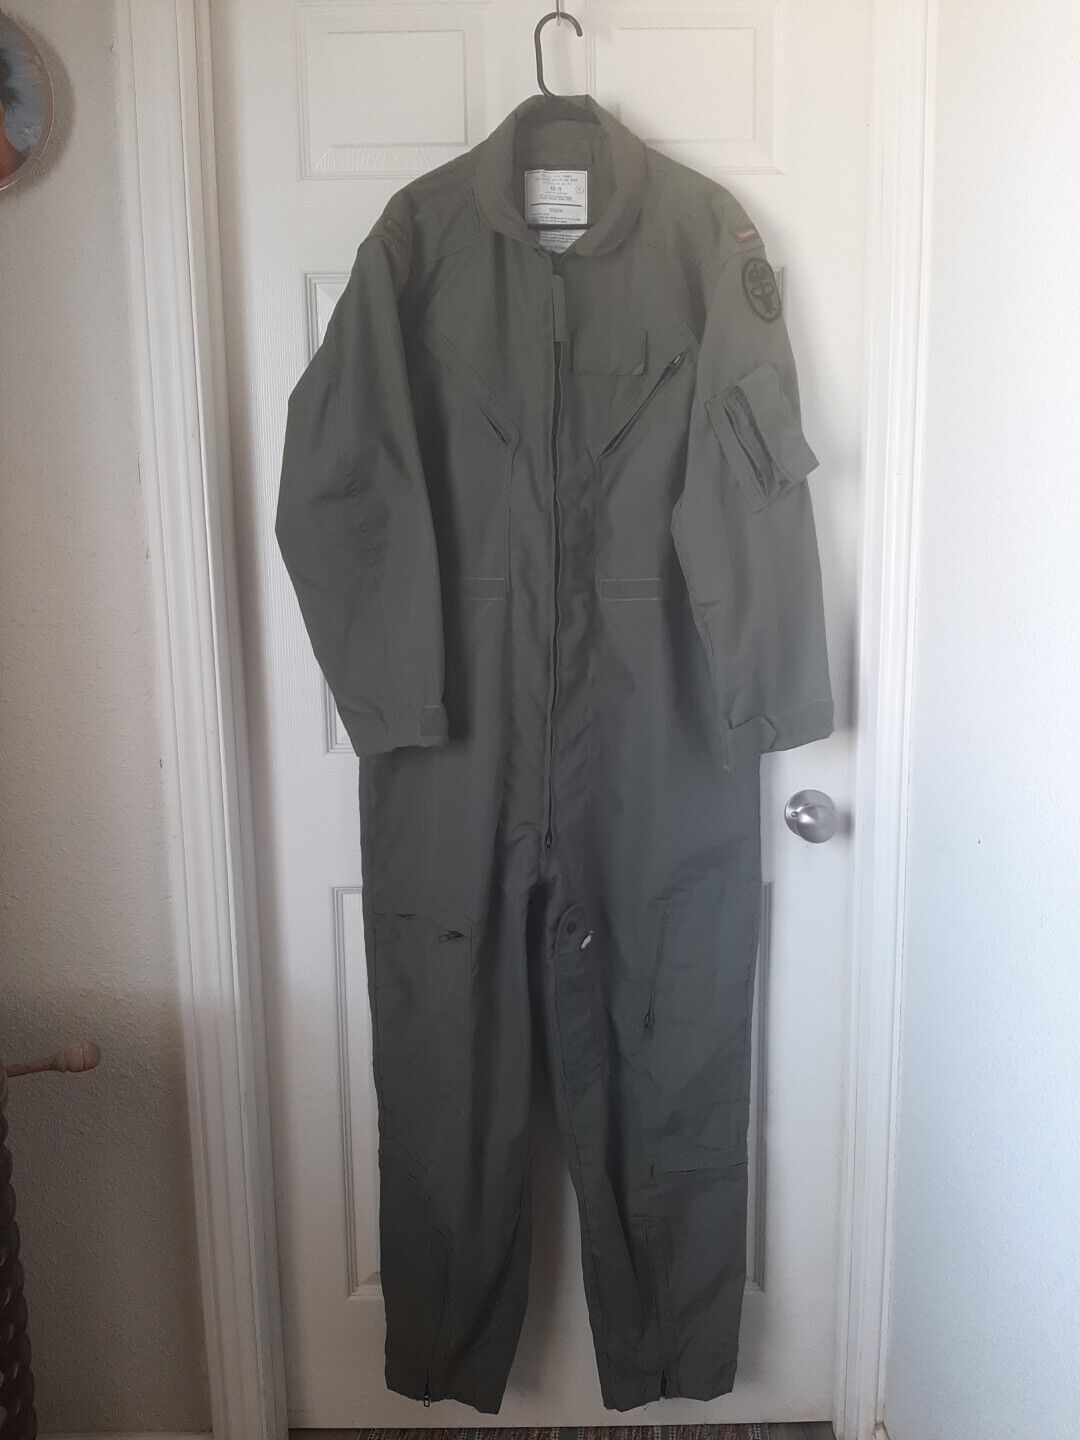 CWU-27P Flight Suit Flyers Coveralls Size 48 R Sage Green  8415-01-043-8395